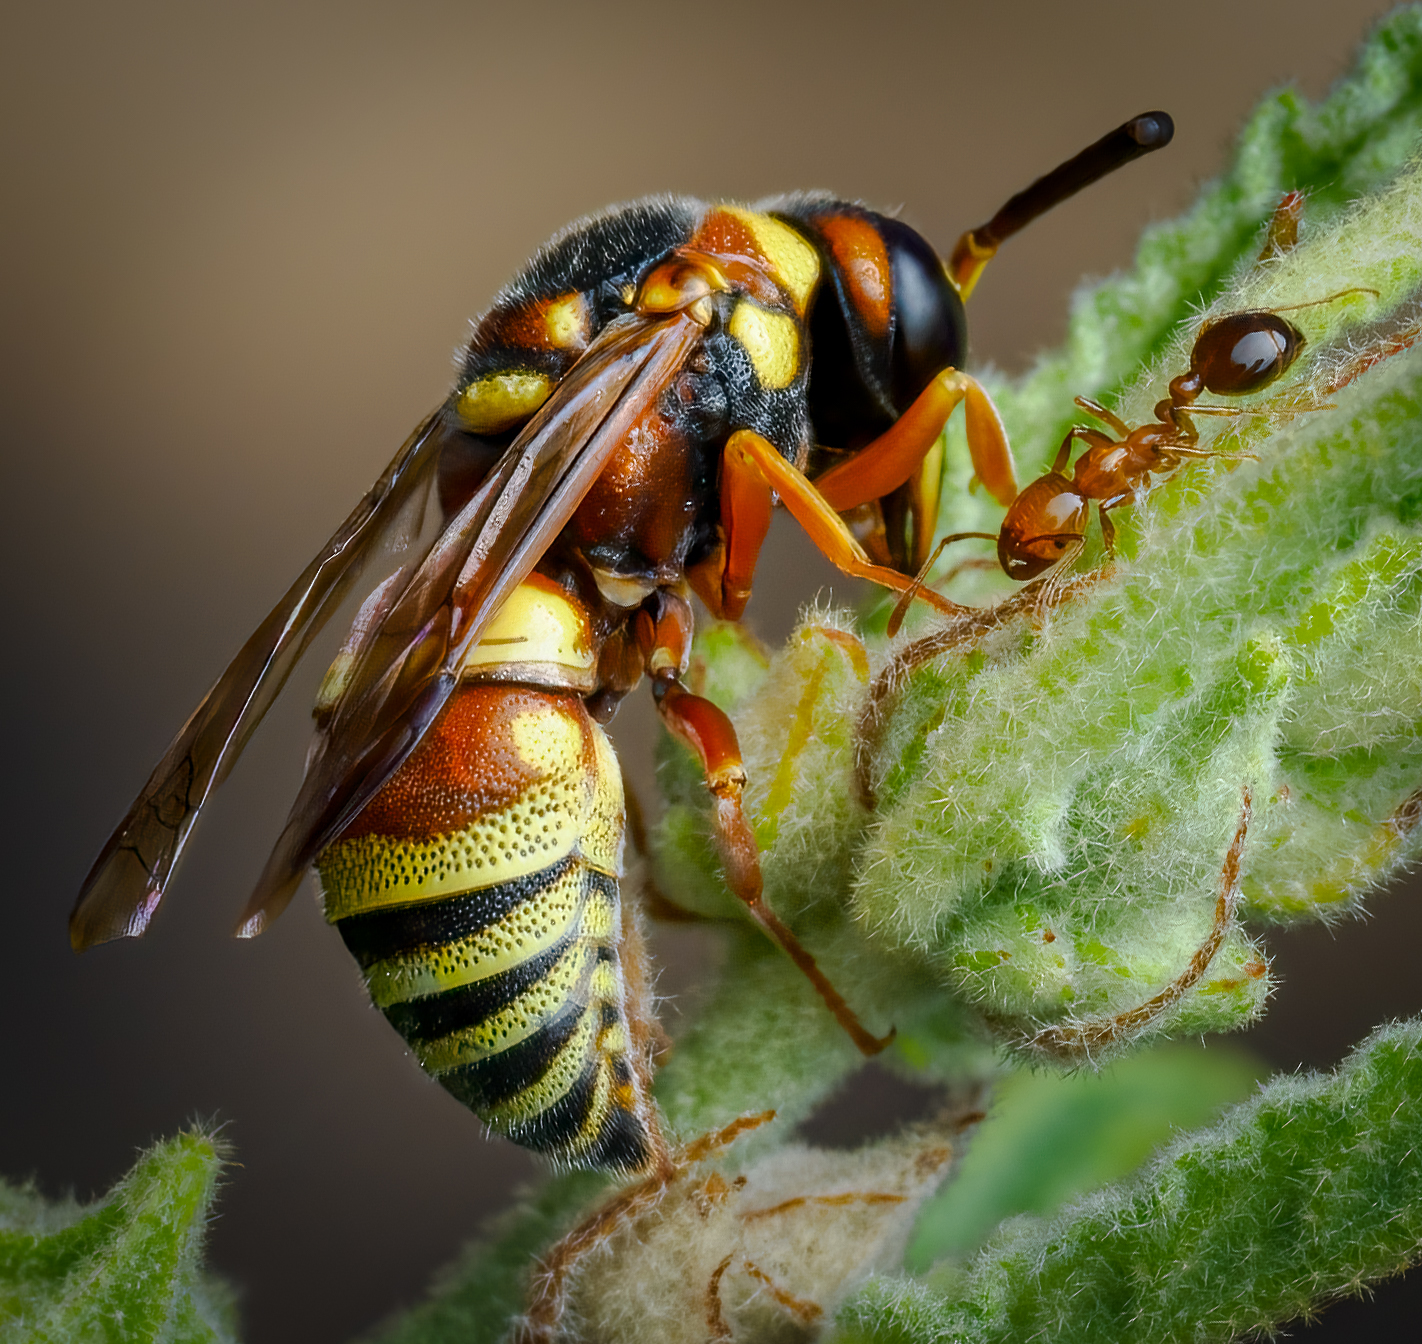 Photo by Gary Smith  |  The wasp and the ant.  An active insect morning in July, handheld with flash.